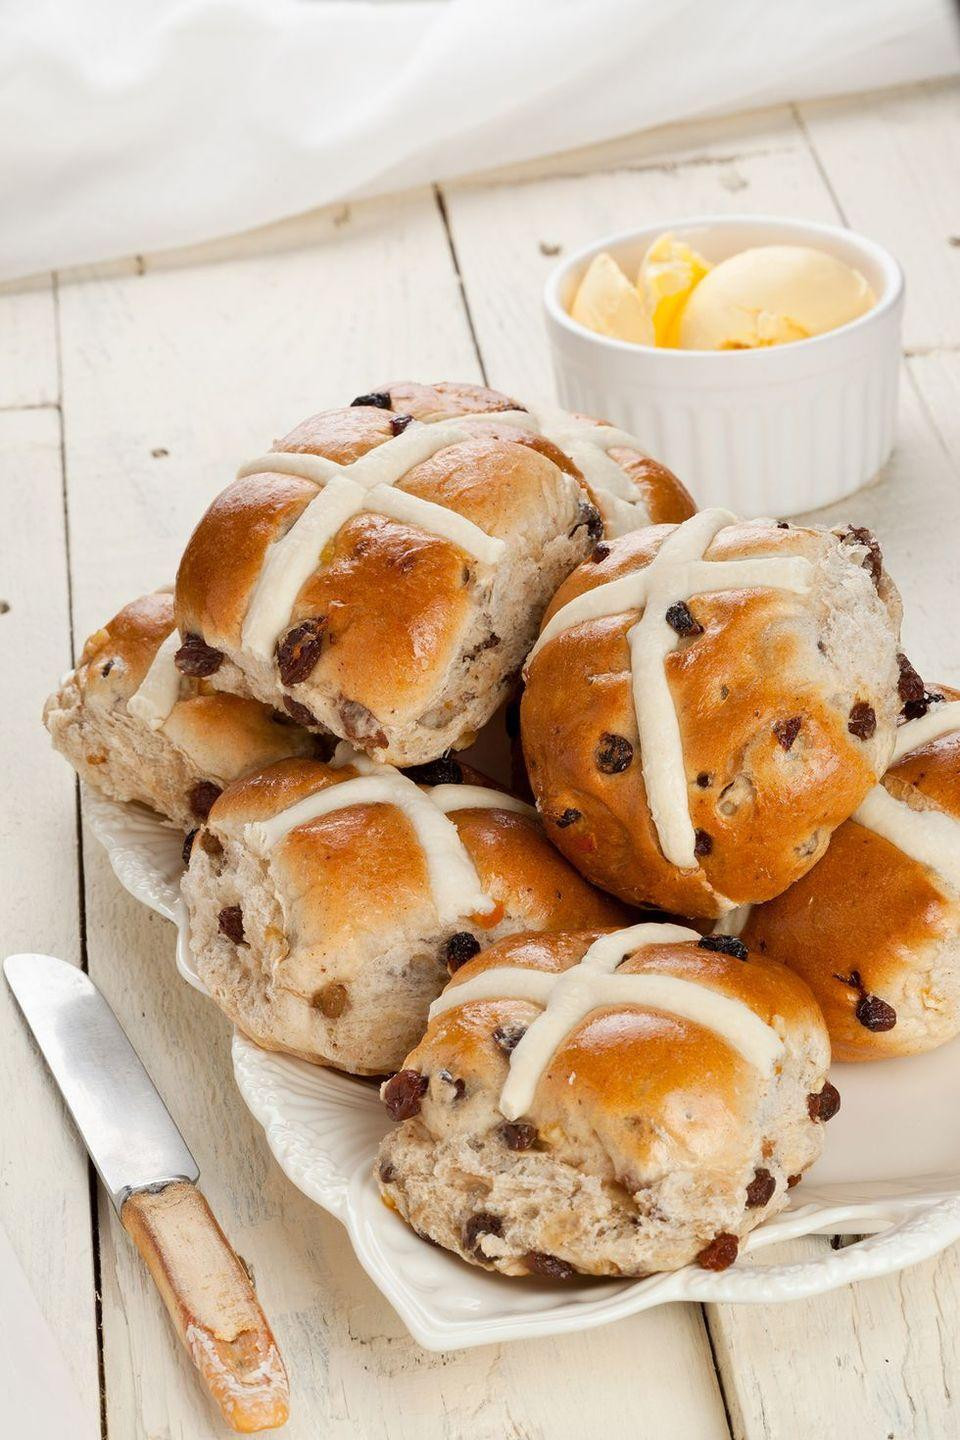 Easy Easter Bread Recipe
 Try These Easy Easter Bread Recipes For Brioche Bread And More